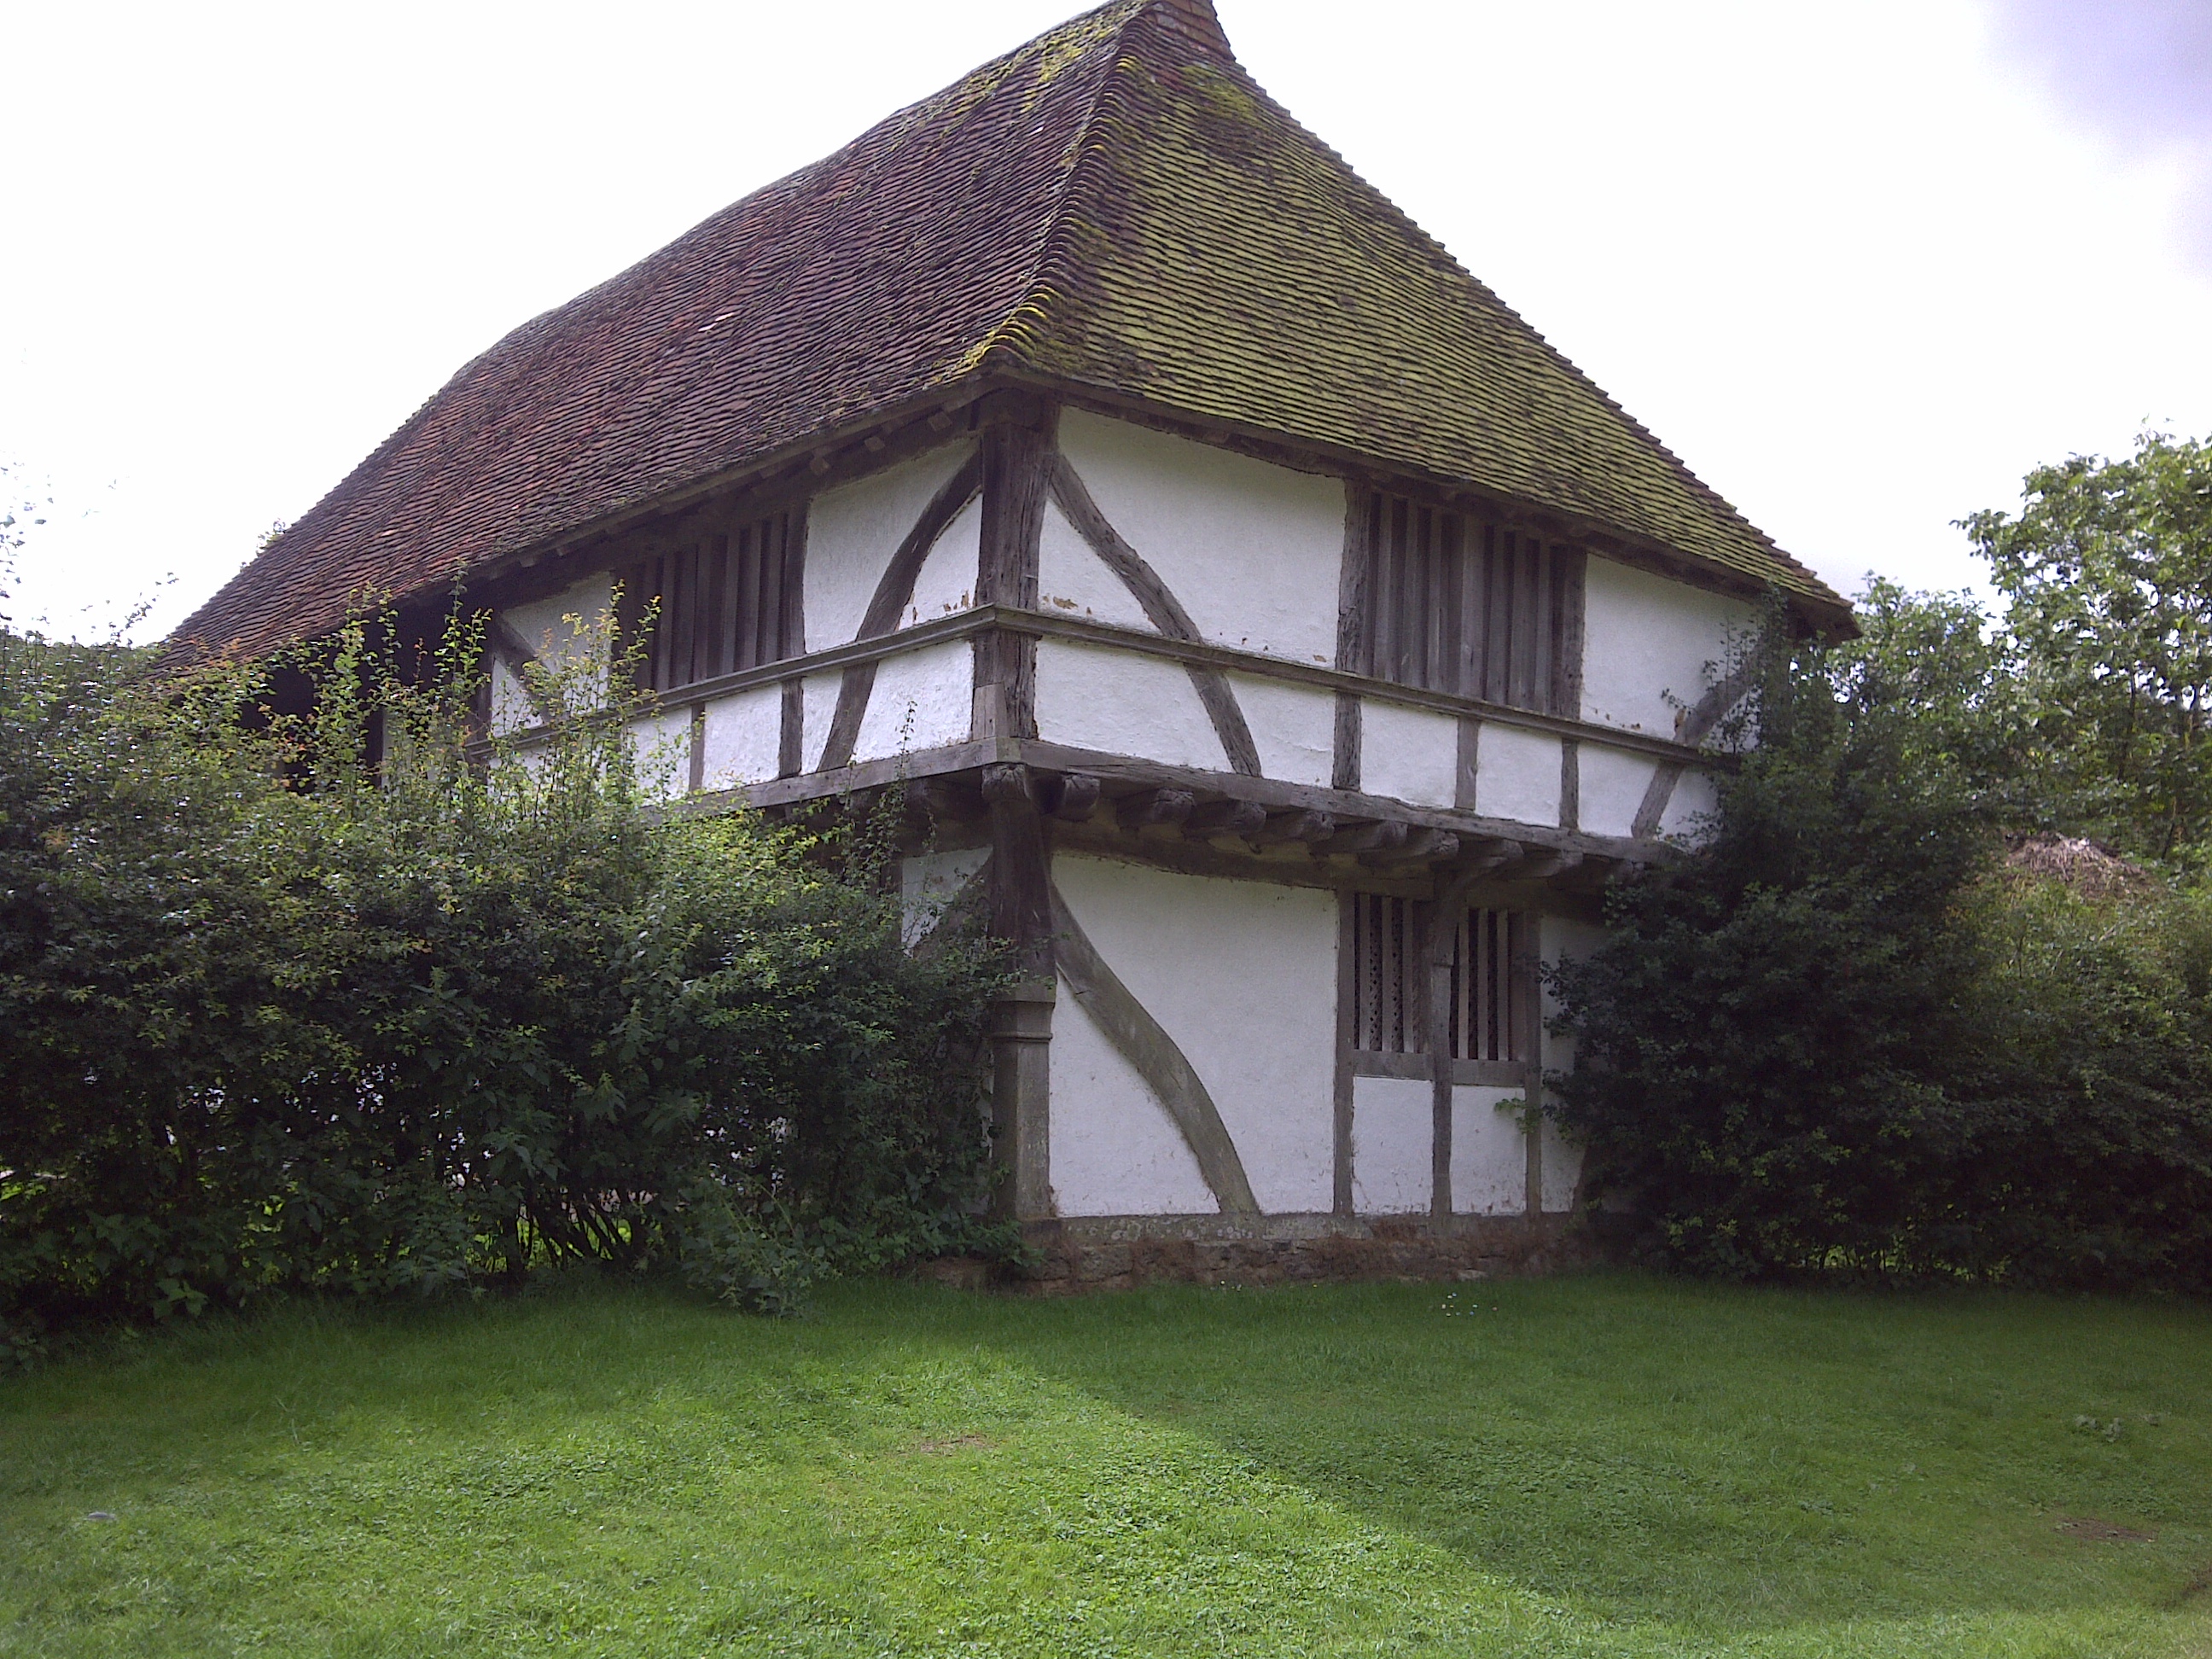 Weald and Downland Museum